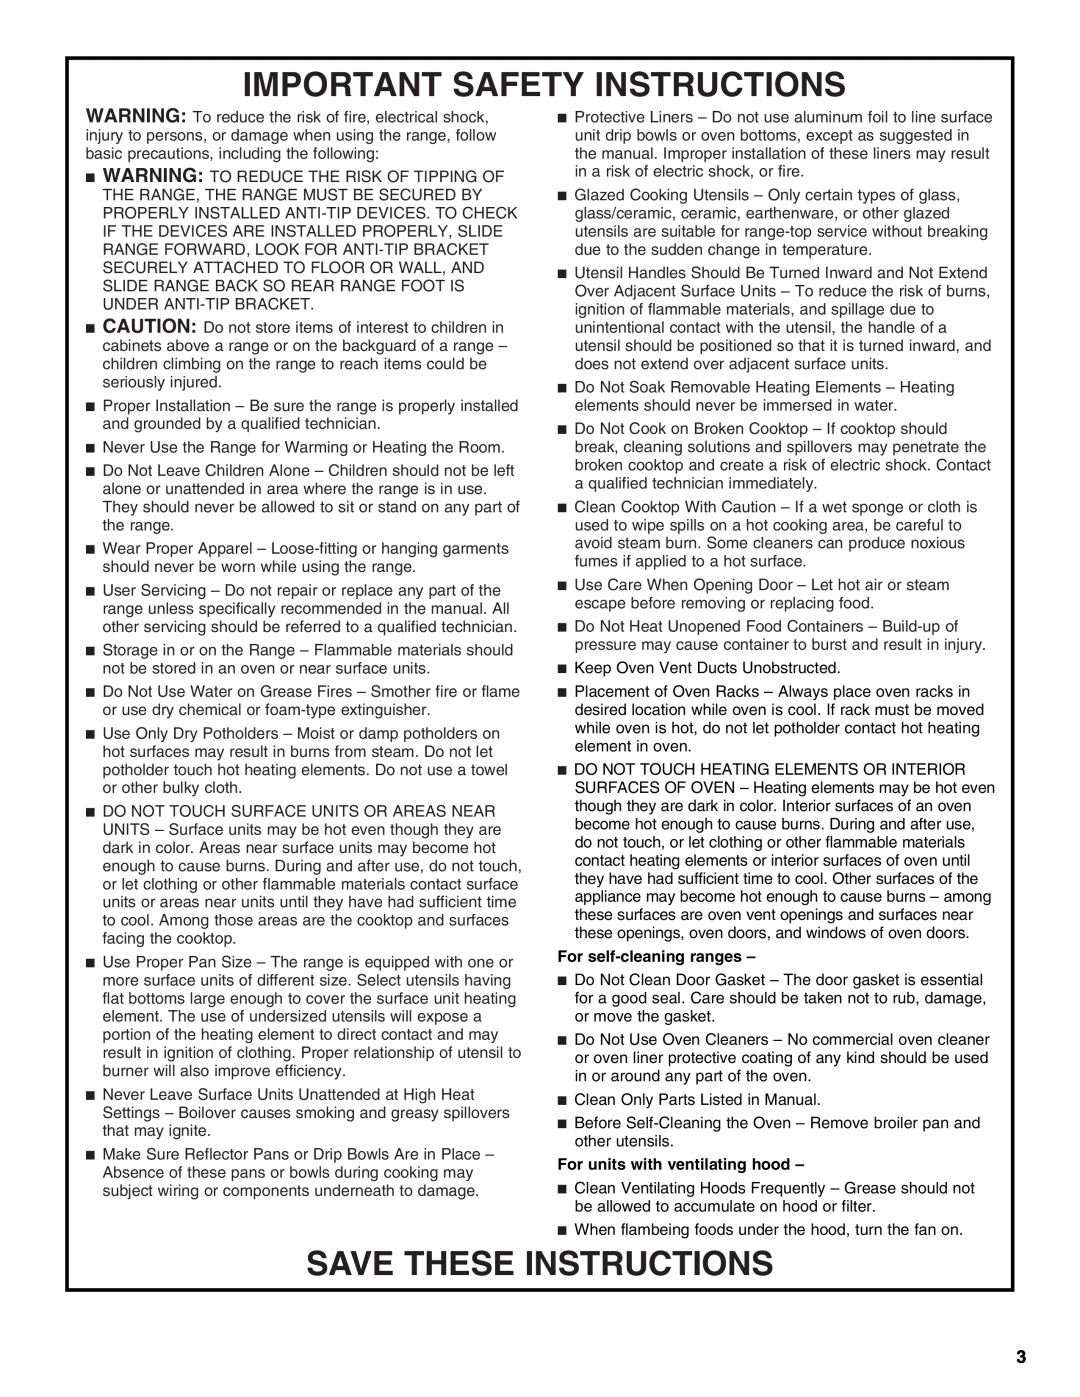 Whirlpool W10394382A warranty Important Safety Instructions, Save These Instructions, For self-cleaning ranges 